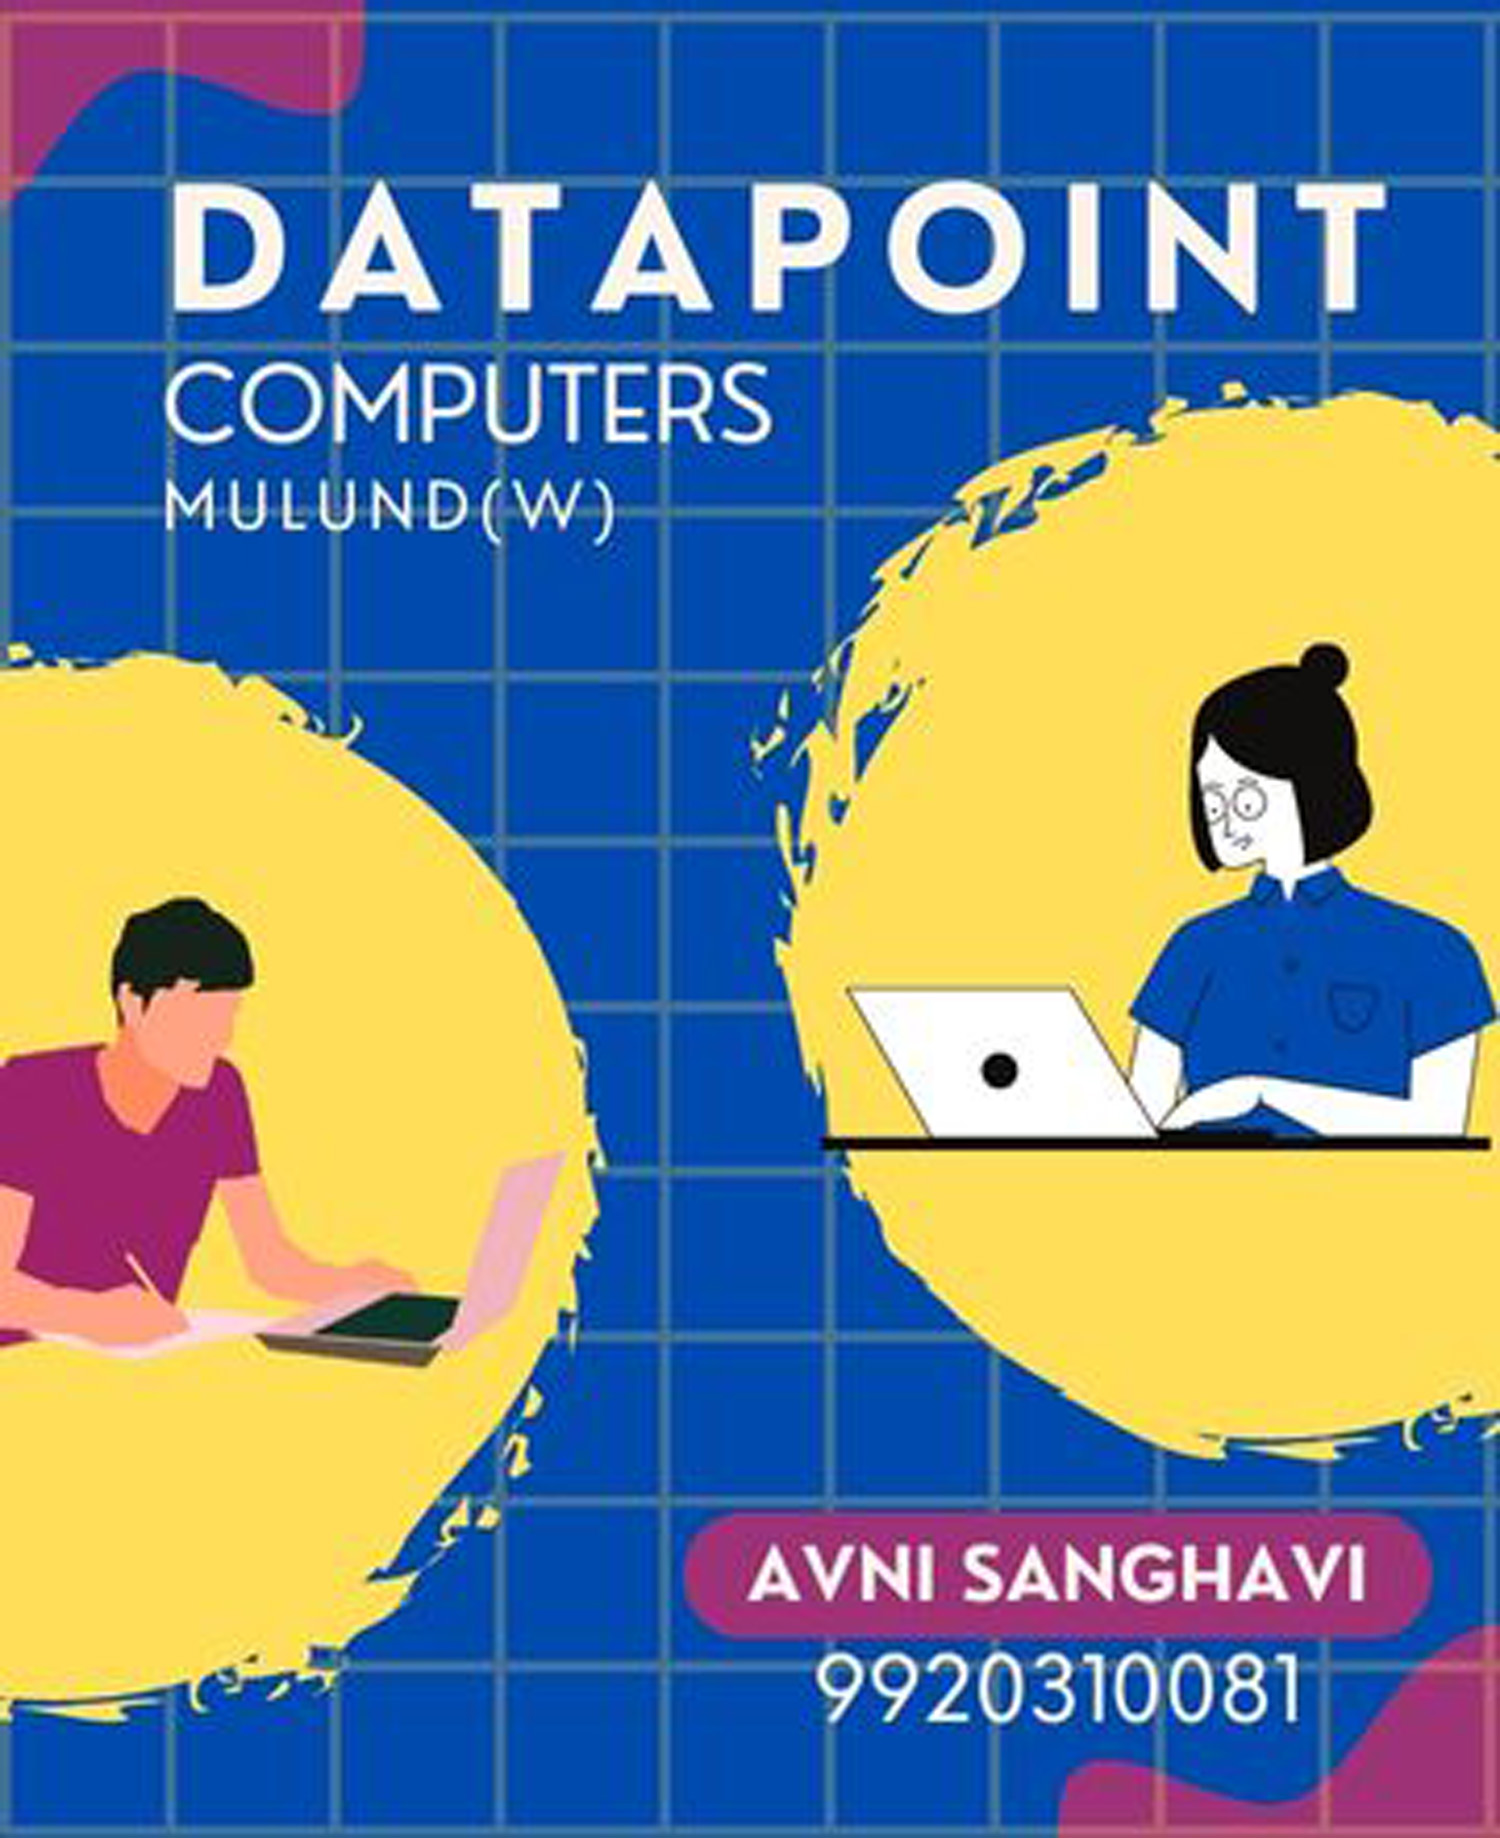 datapoint computers mulund,graphic designing courses in mulund, computer courses in mulund, computer classes in mulund, digital marketing courses in mulund, microsoft office courses in mulund, basic courses in mulund, advanced excel courses in mulund, word,excel, powerpoint, tally, vba